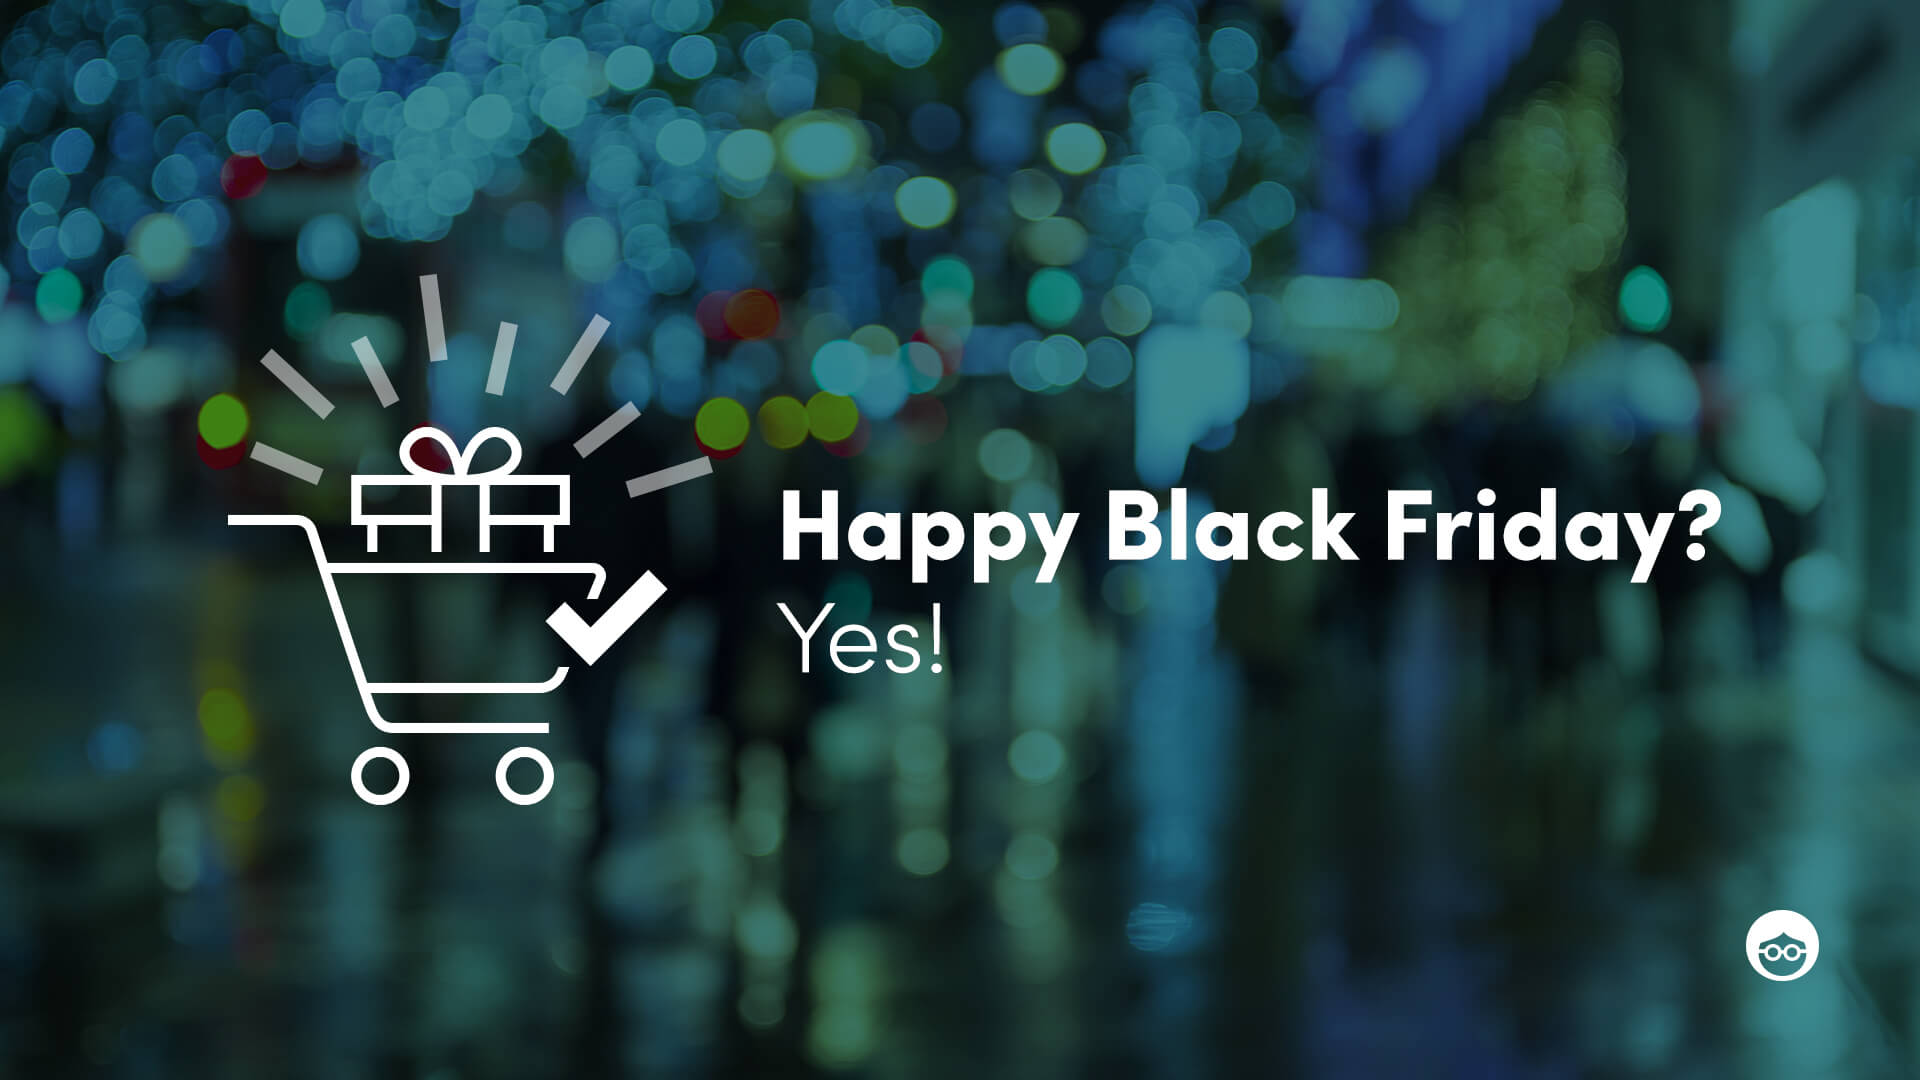 Black Friday and Cyber Monday Sales from Companies We Like